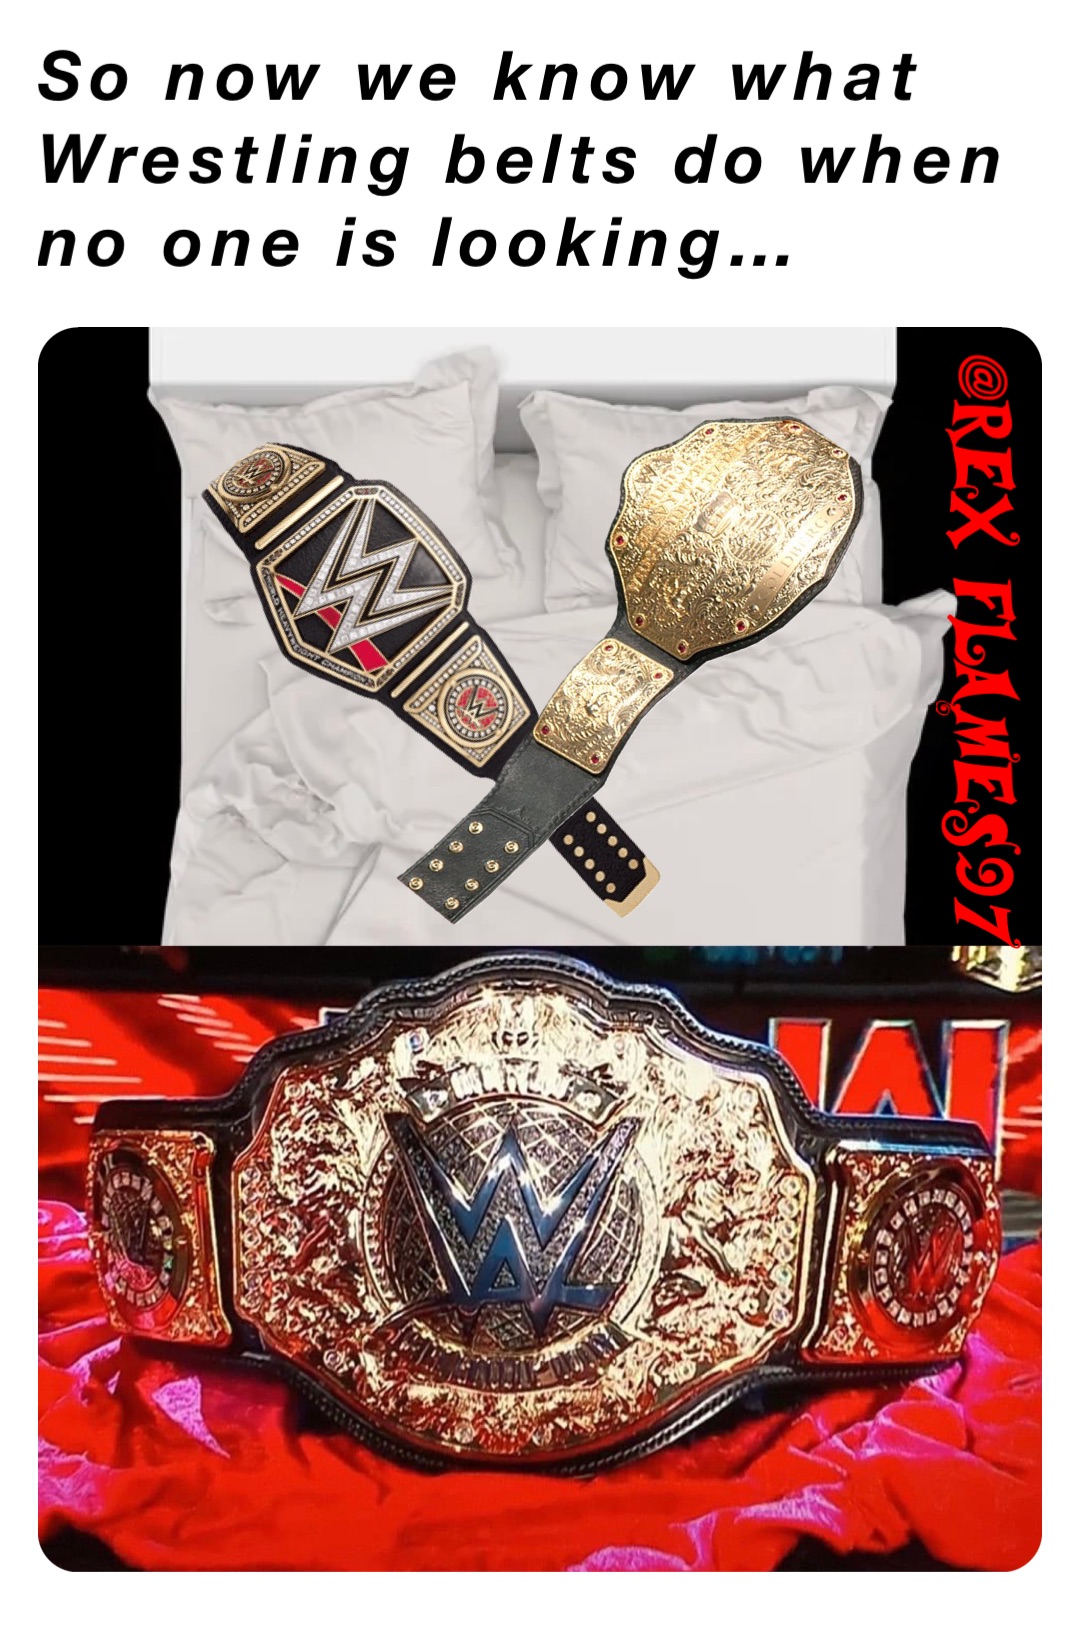 So now we know what Wrestling belts do when no one is looking…